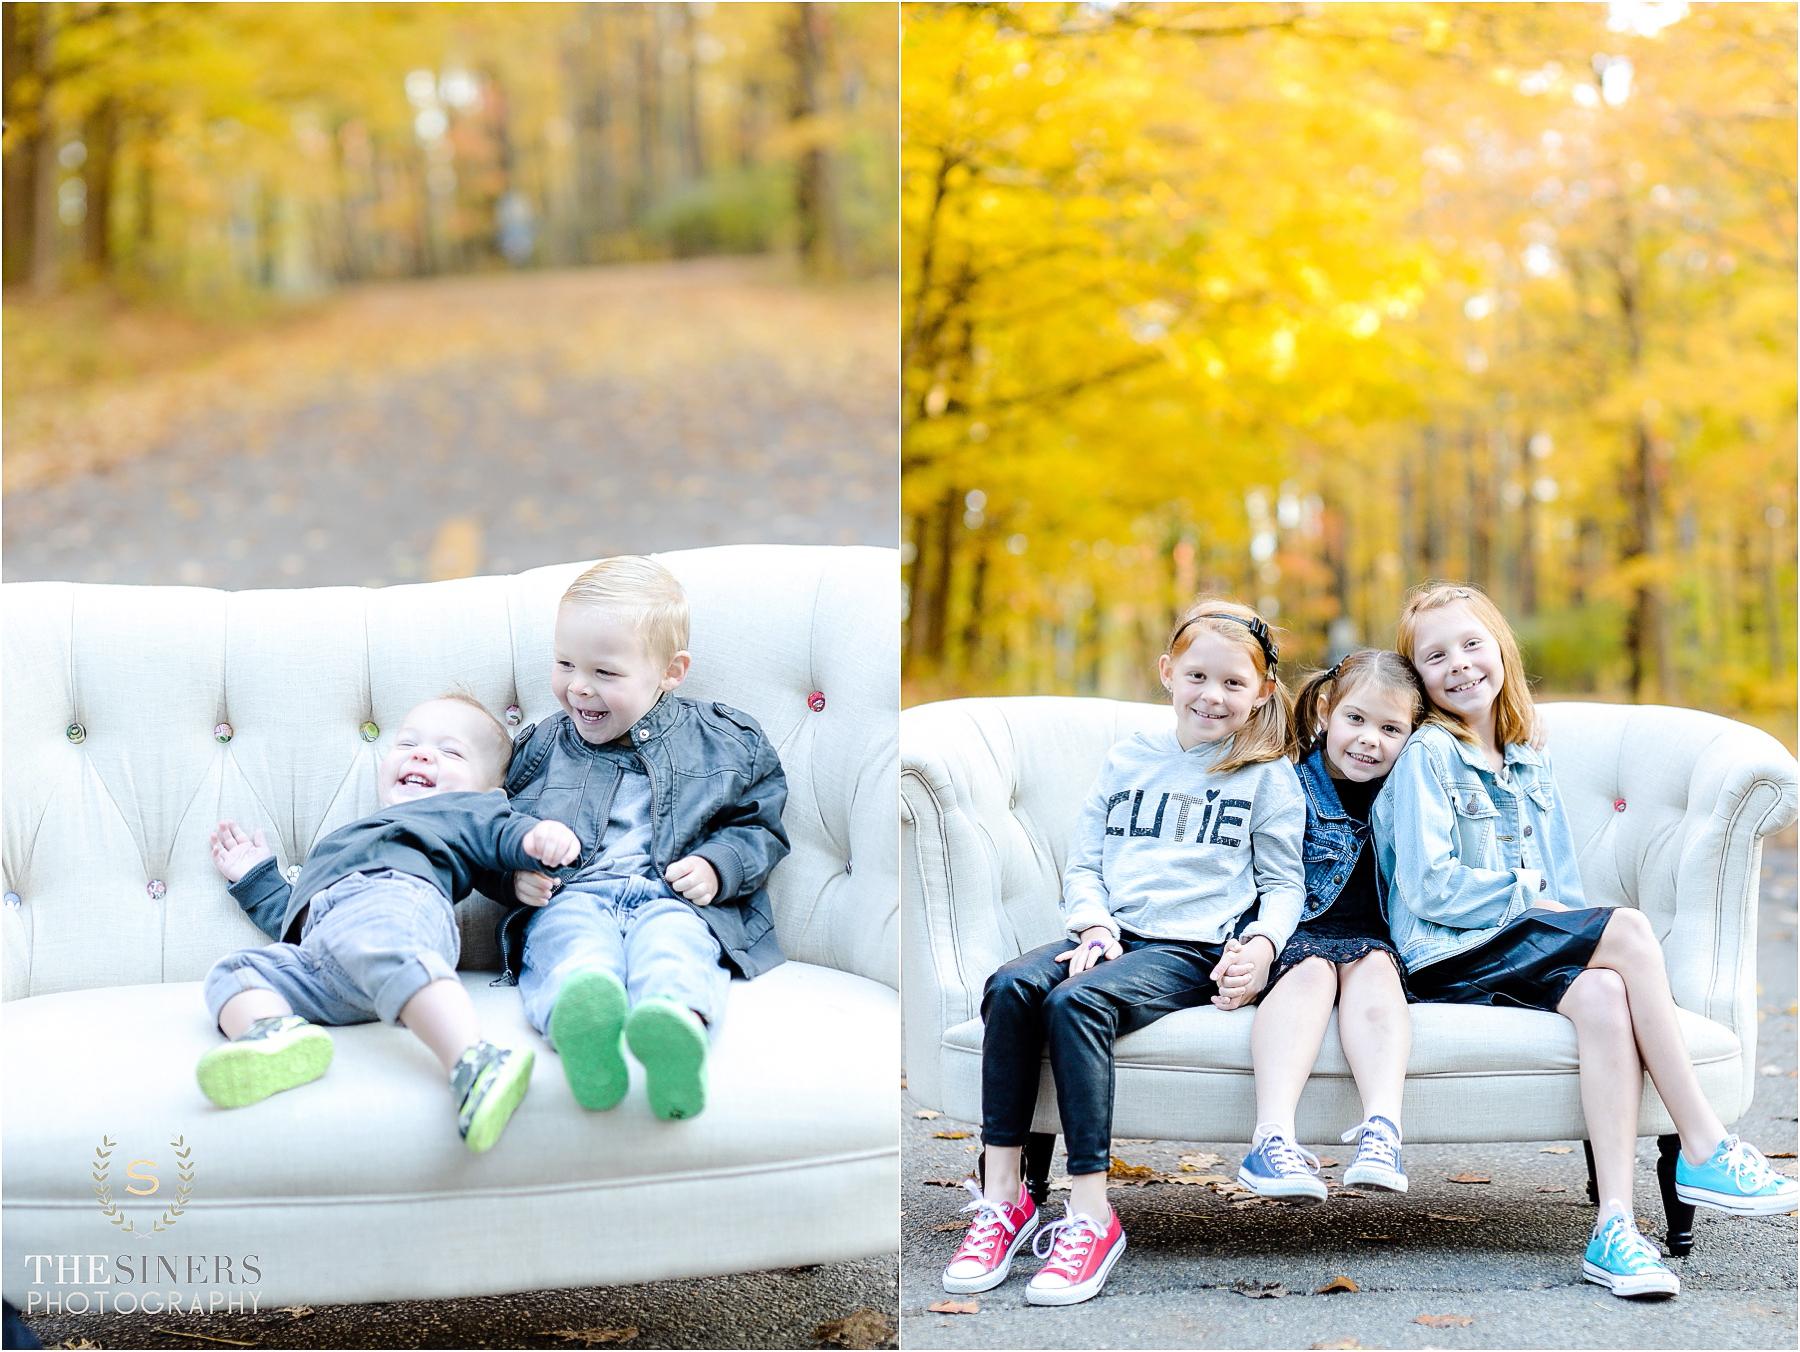 Sumrall Family_Indianapolis Family Photographer_TheSinersPhotography_0011